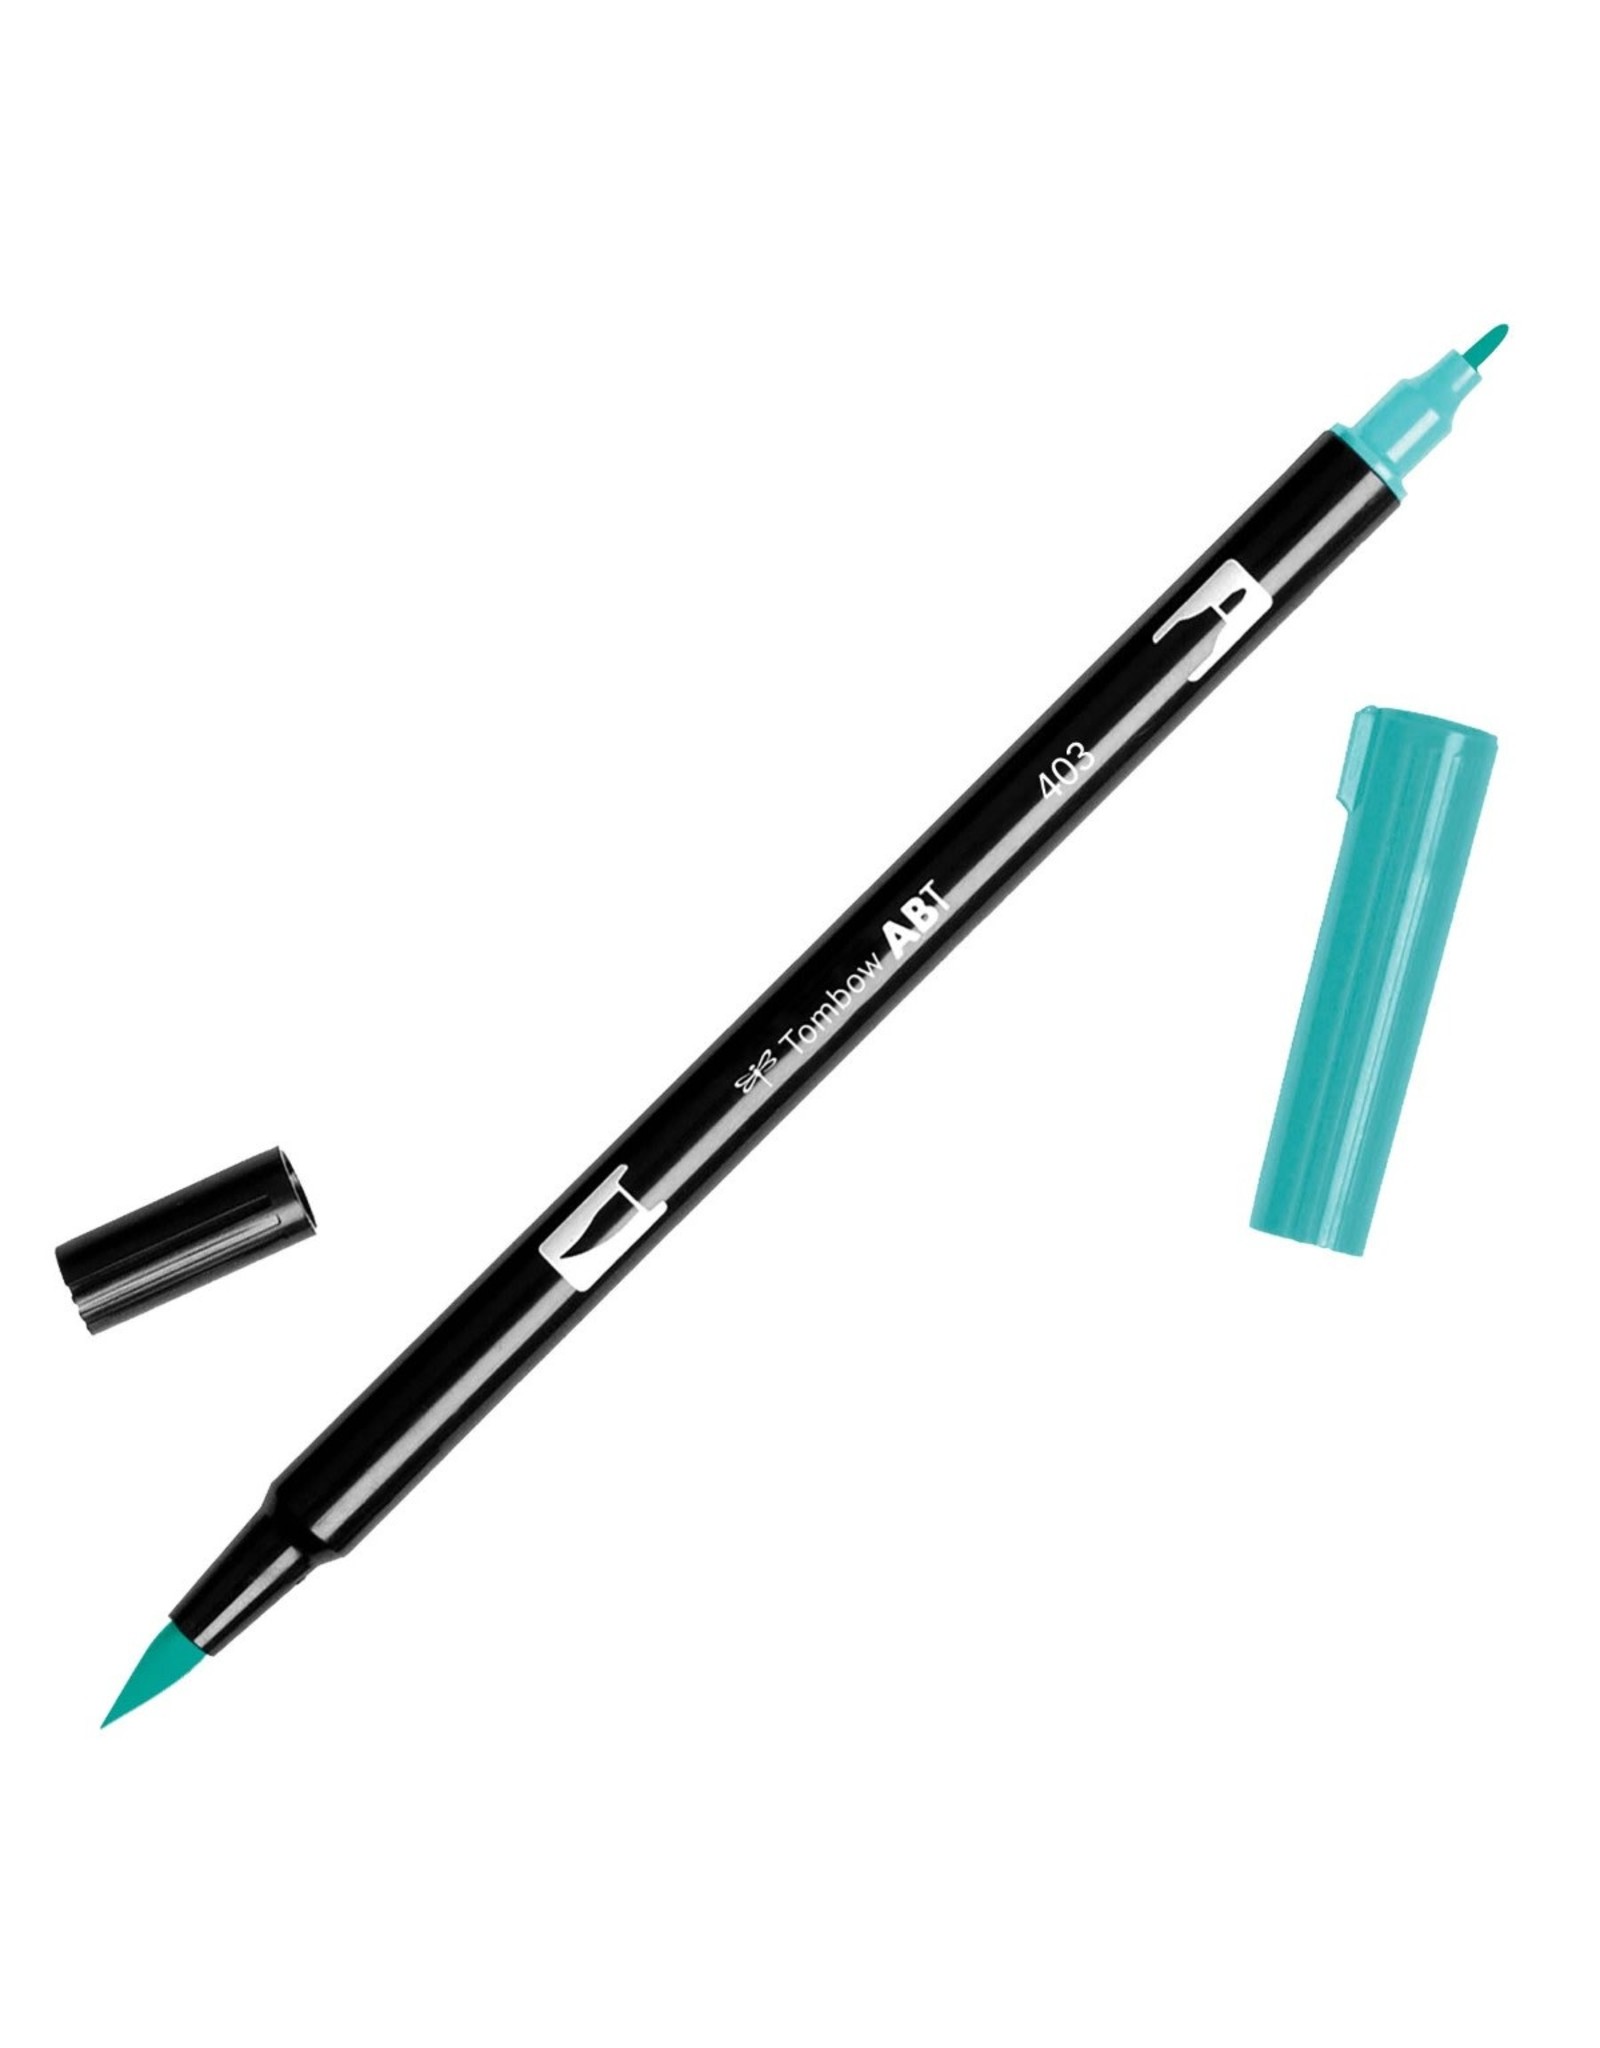 TOMBOW TOMBOW ABT-403 BRIGHT BLUE DUAL BRUSH MARKER